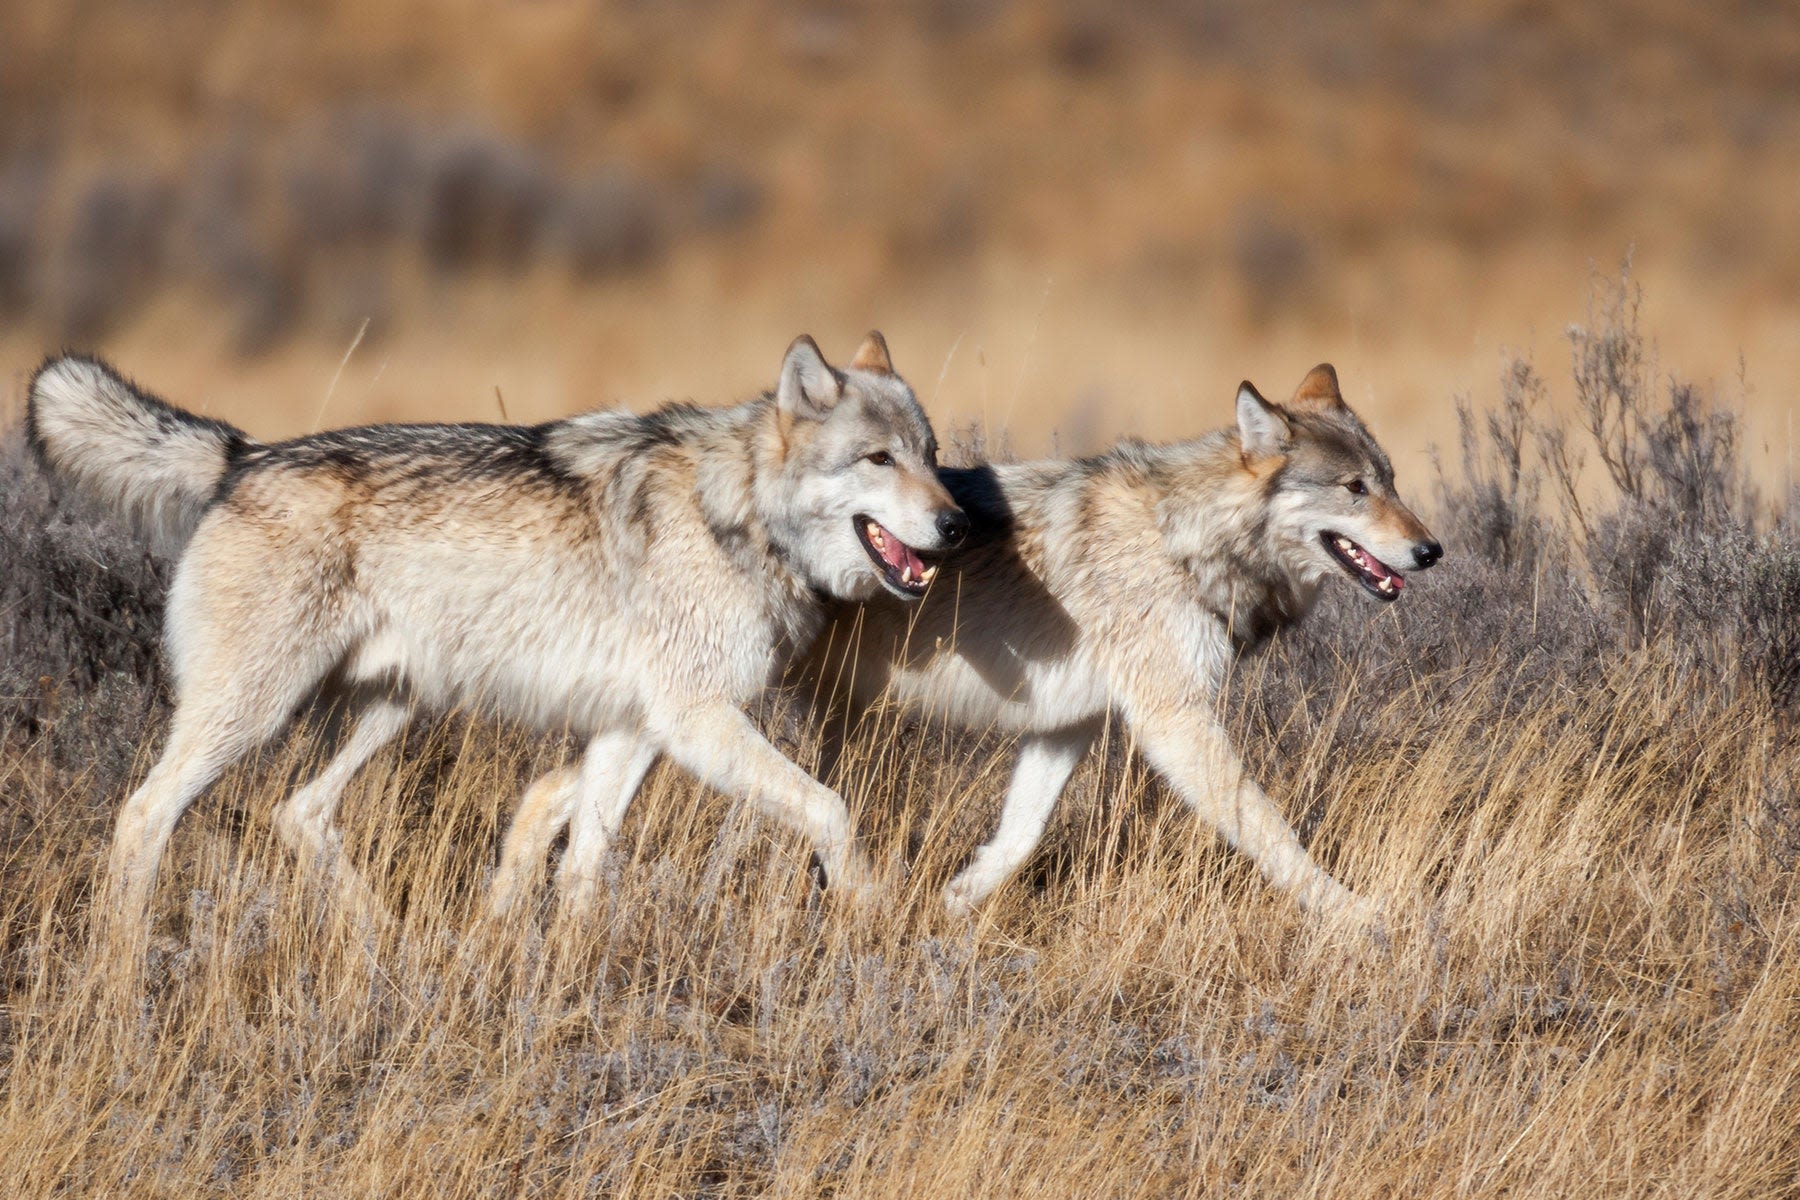 Bill That Would Delist Gray Wolves Passes U.S. House—Will it Clear the Senate?